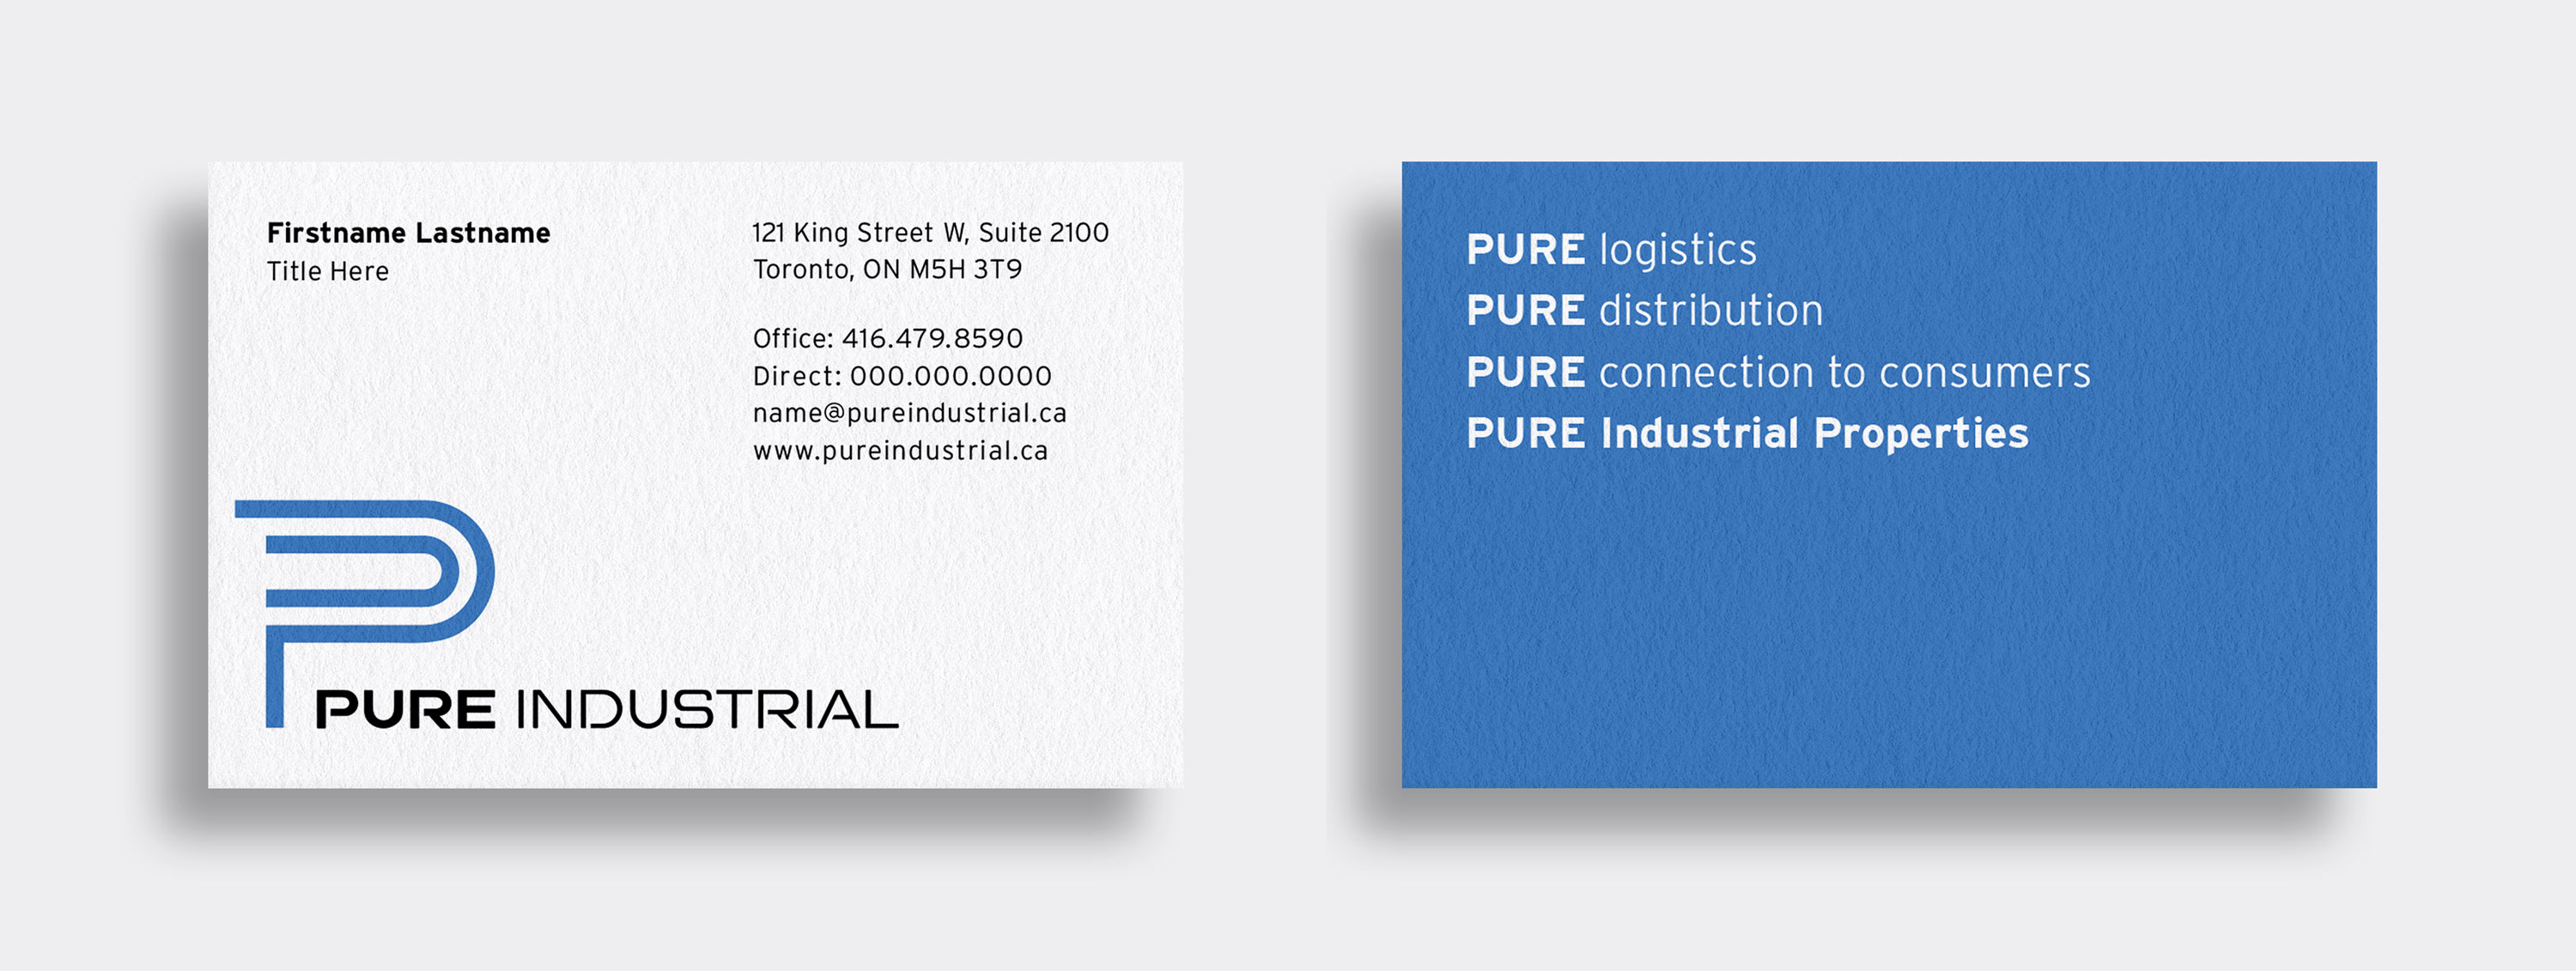 Business card layout font with logo and contact information, Back with full blue panel and white text